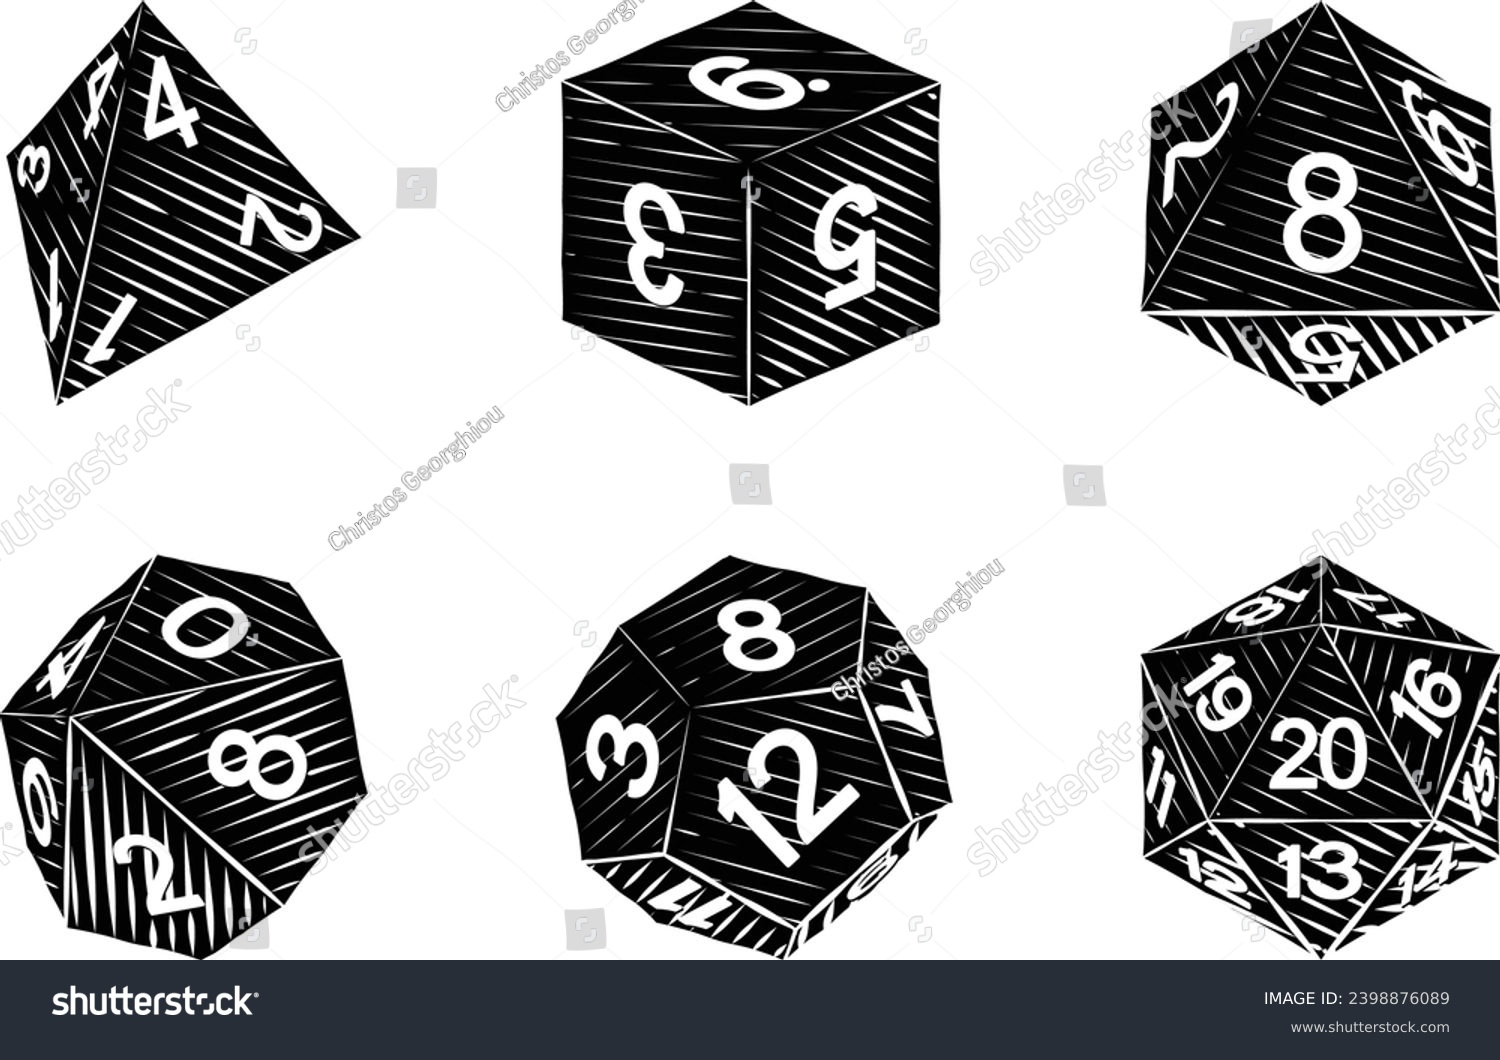 SVG of A set of common game dice used for roleplaying RPG or fantasy tabletop board games in a vintage retro woodcut style
 svg